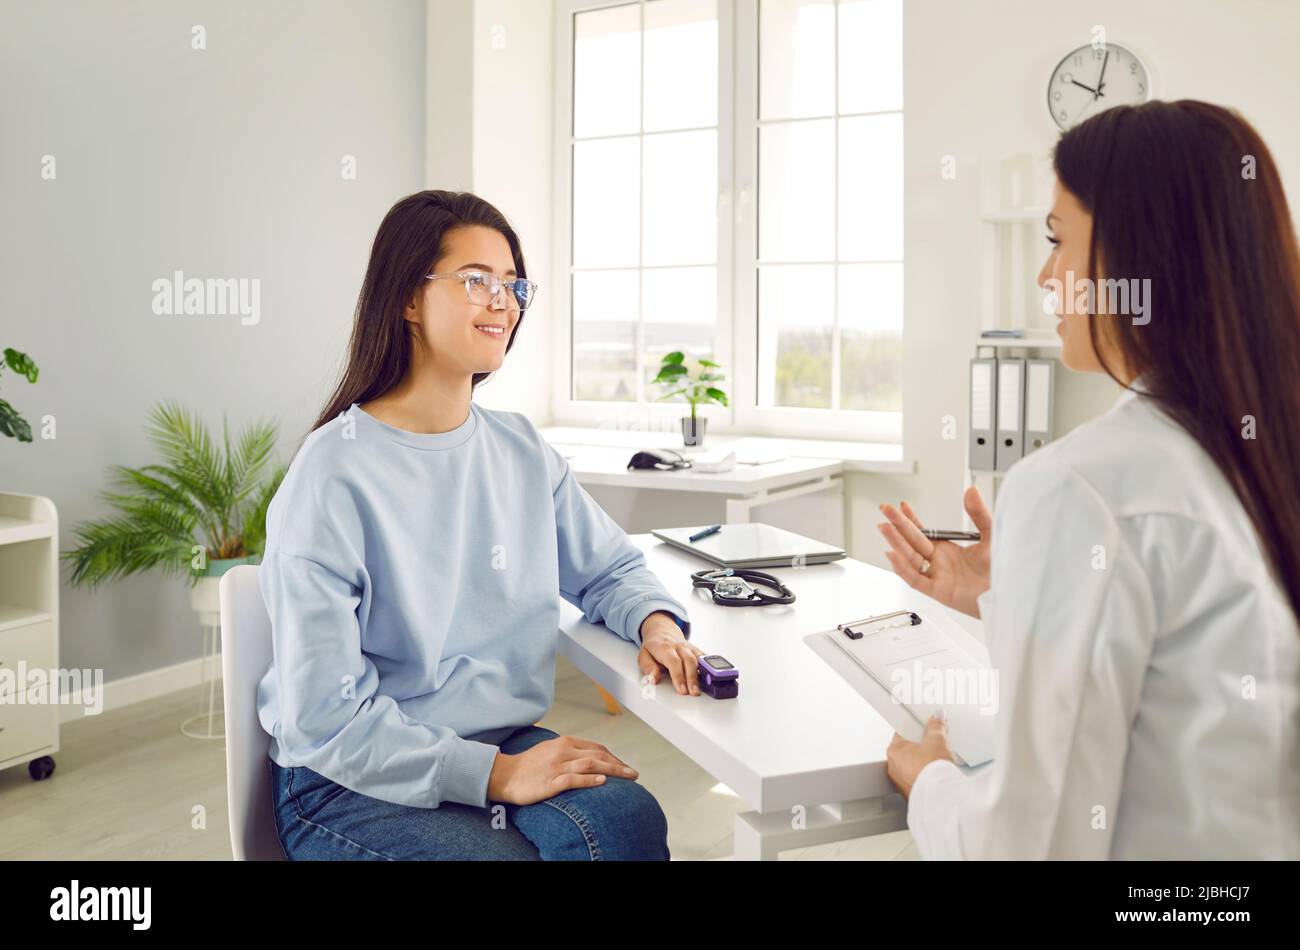 Doctor talks to young female patient who uses fingertip pulse oximeter in medical office. Stock Photo